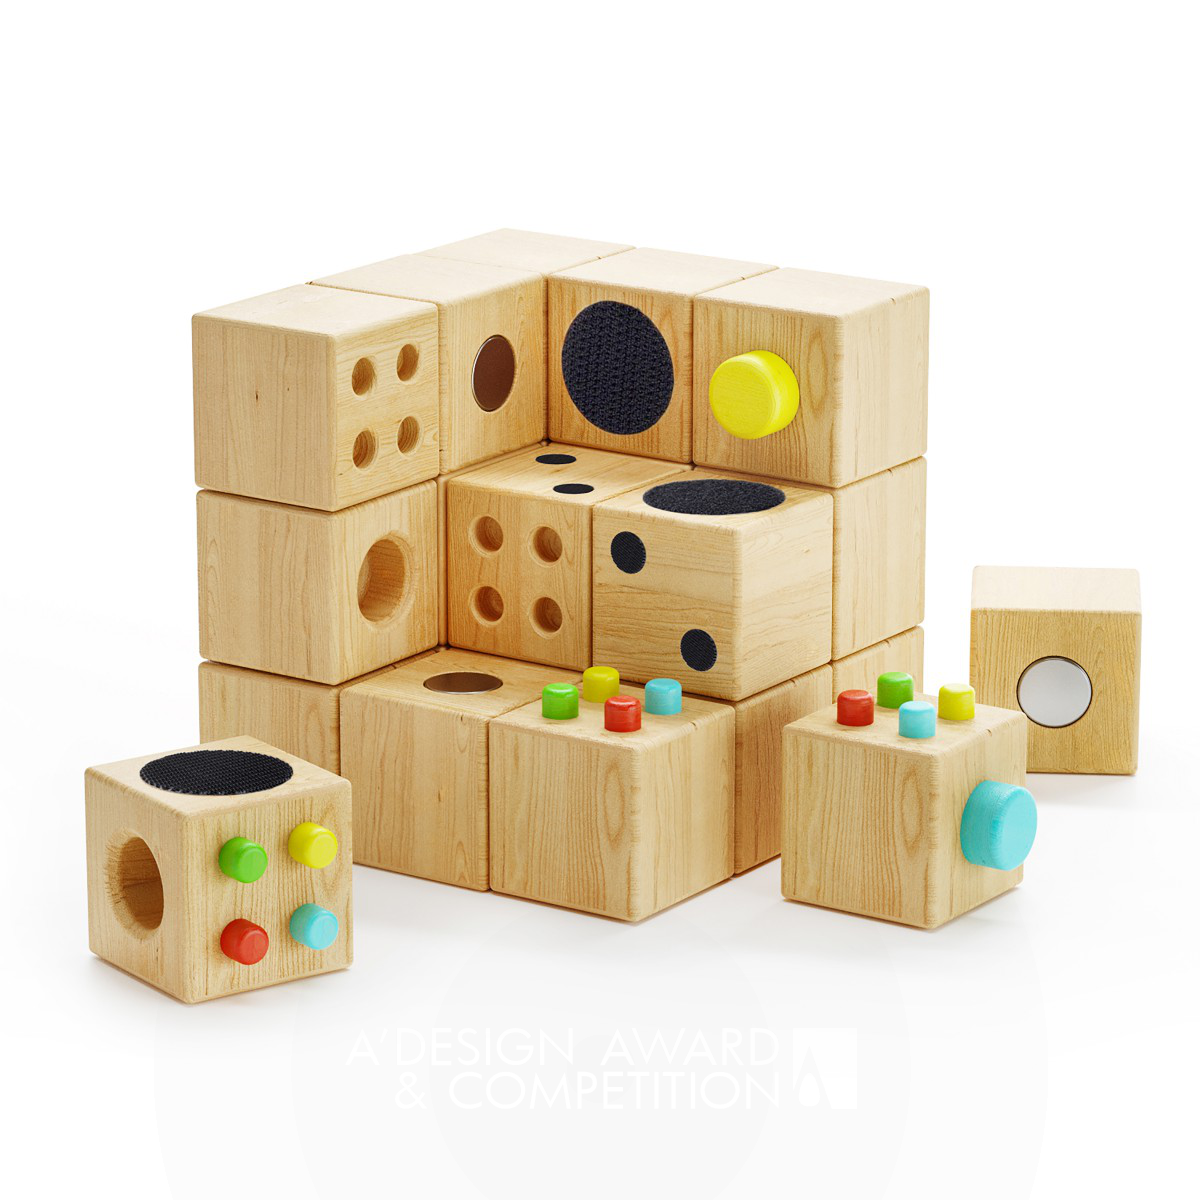 Wooden Construction Toy "Cubecor" by Esmail Ghadrdani